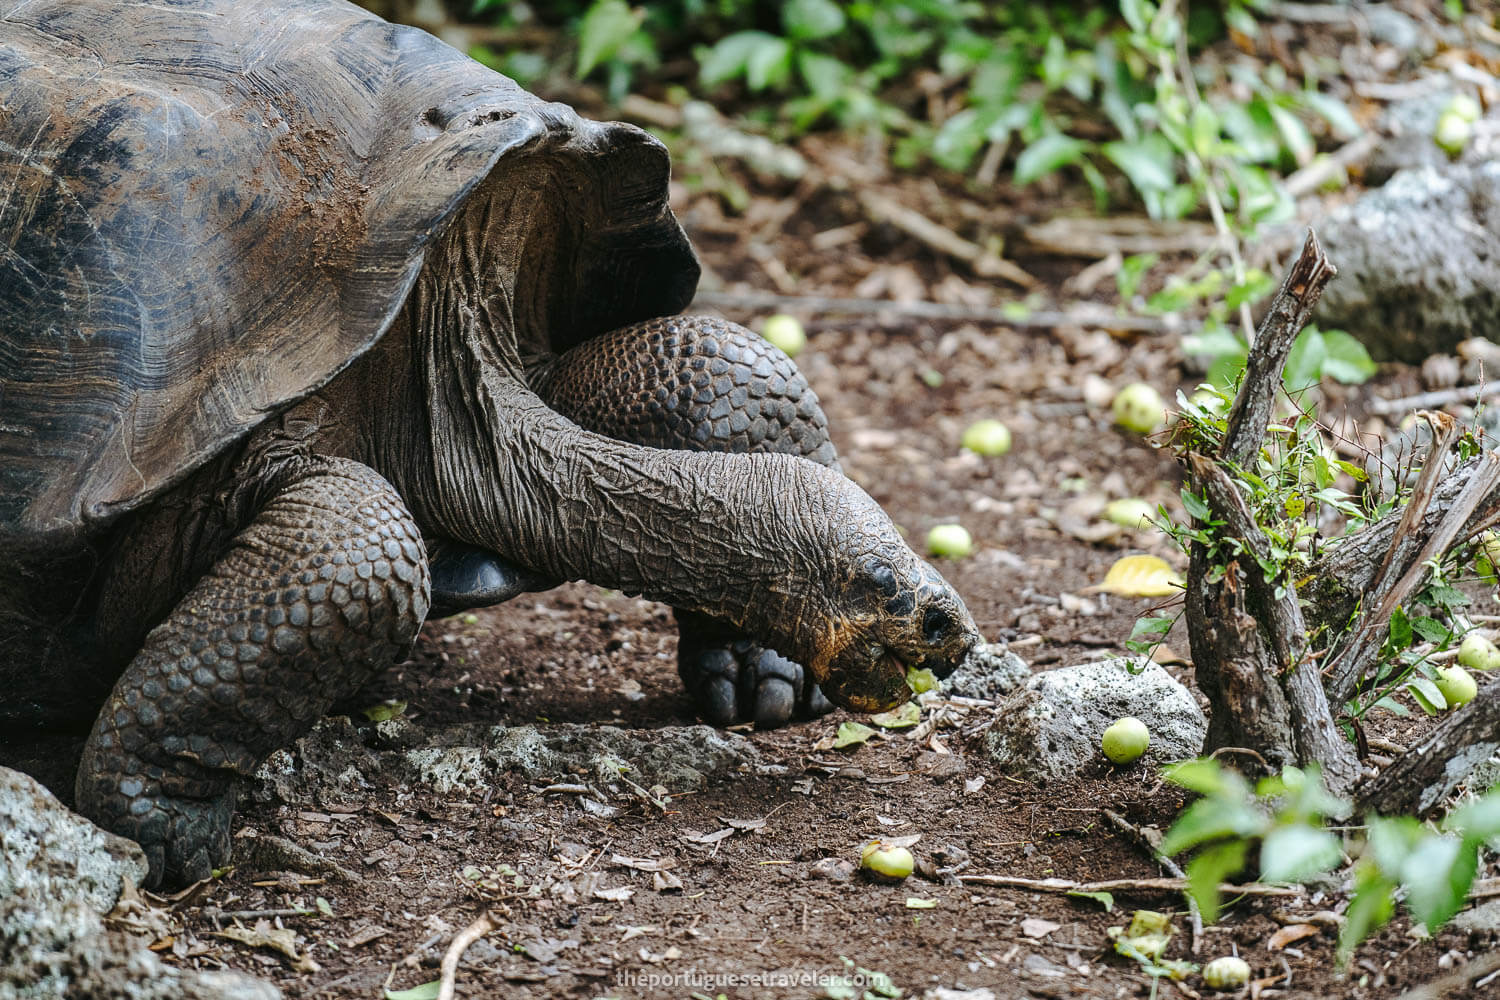 A giant Galapagos tortoise eating